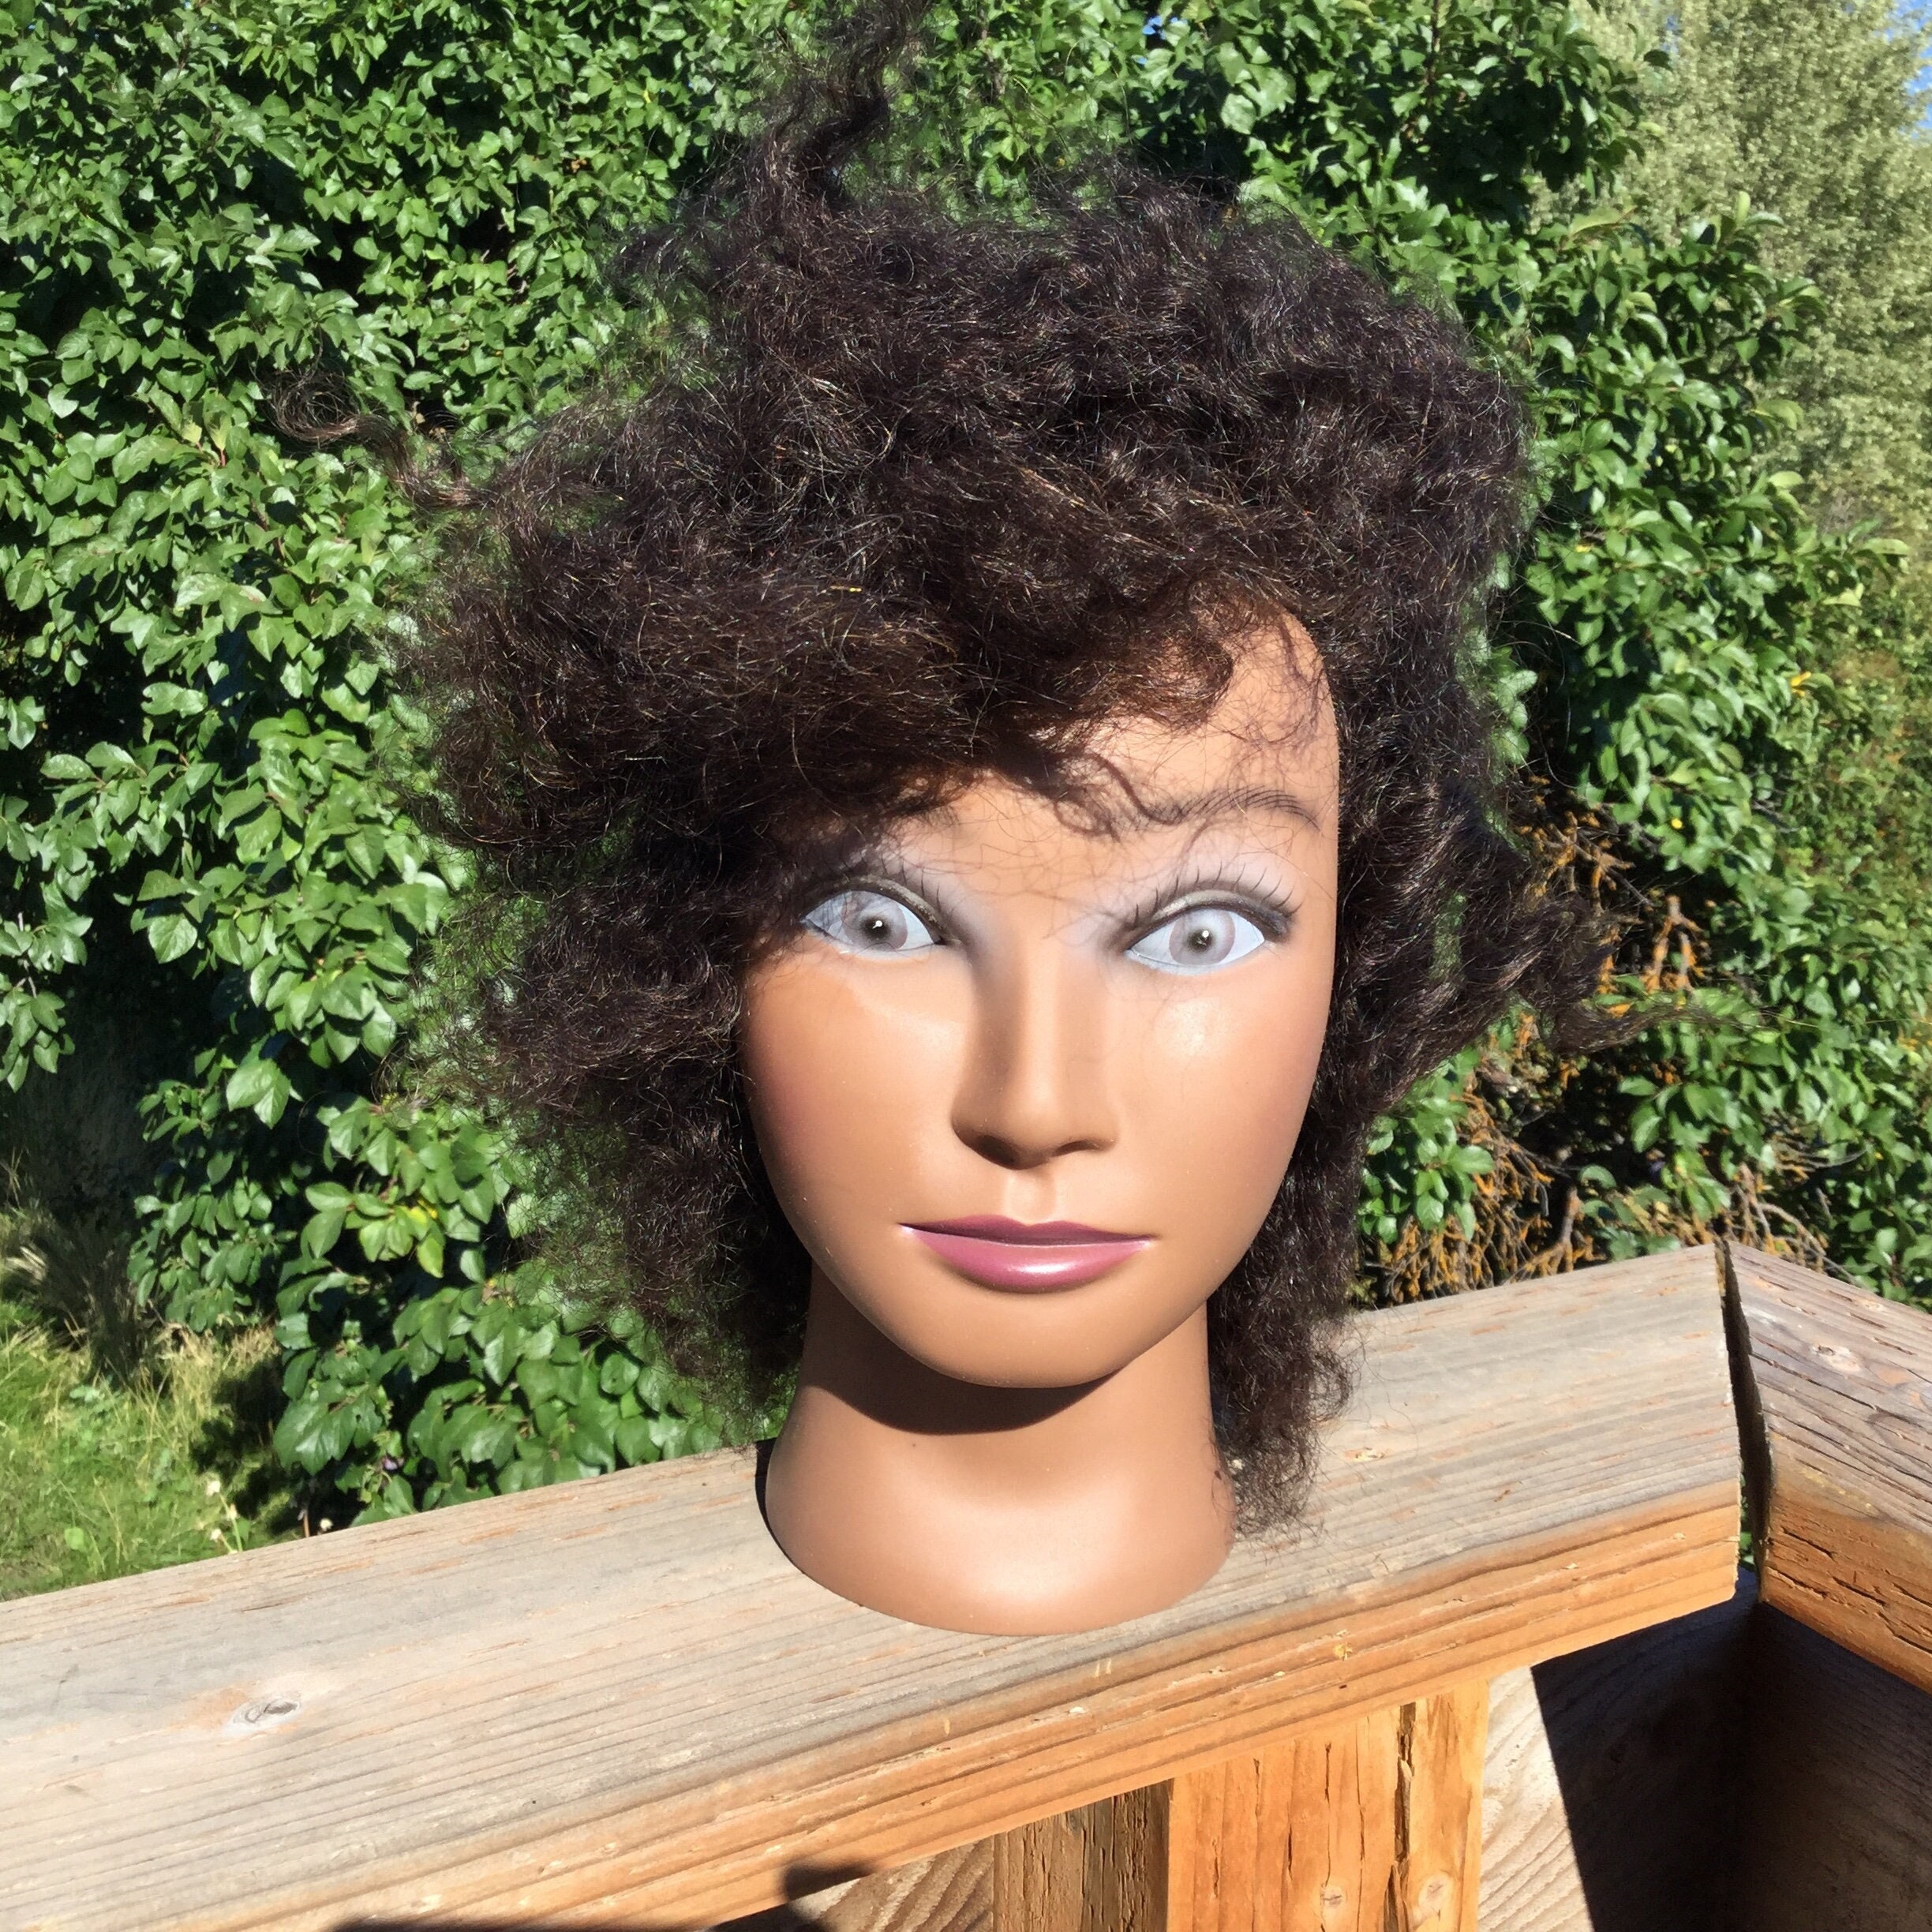 Marianna Cosmetology Mannequin Head Miss and 16 similar items